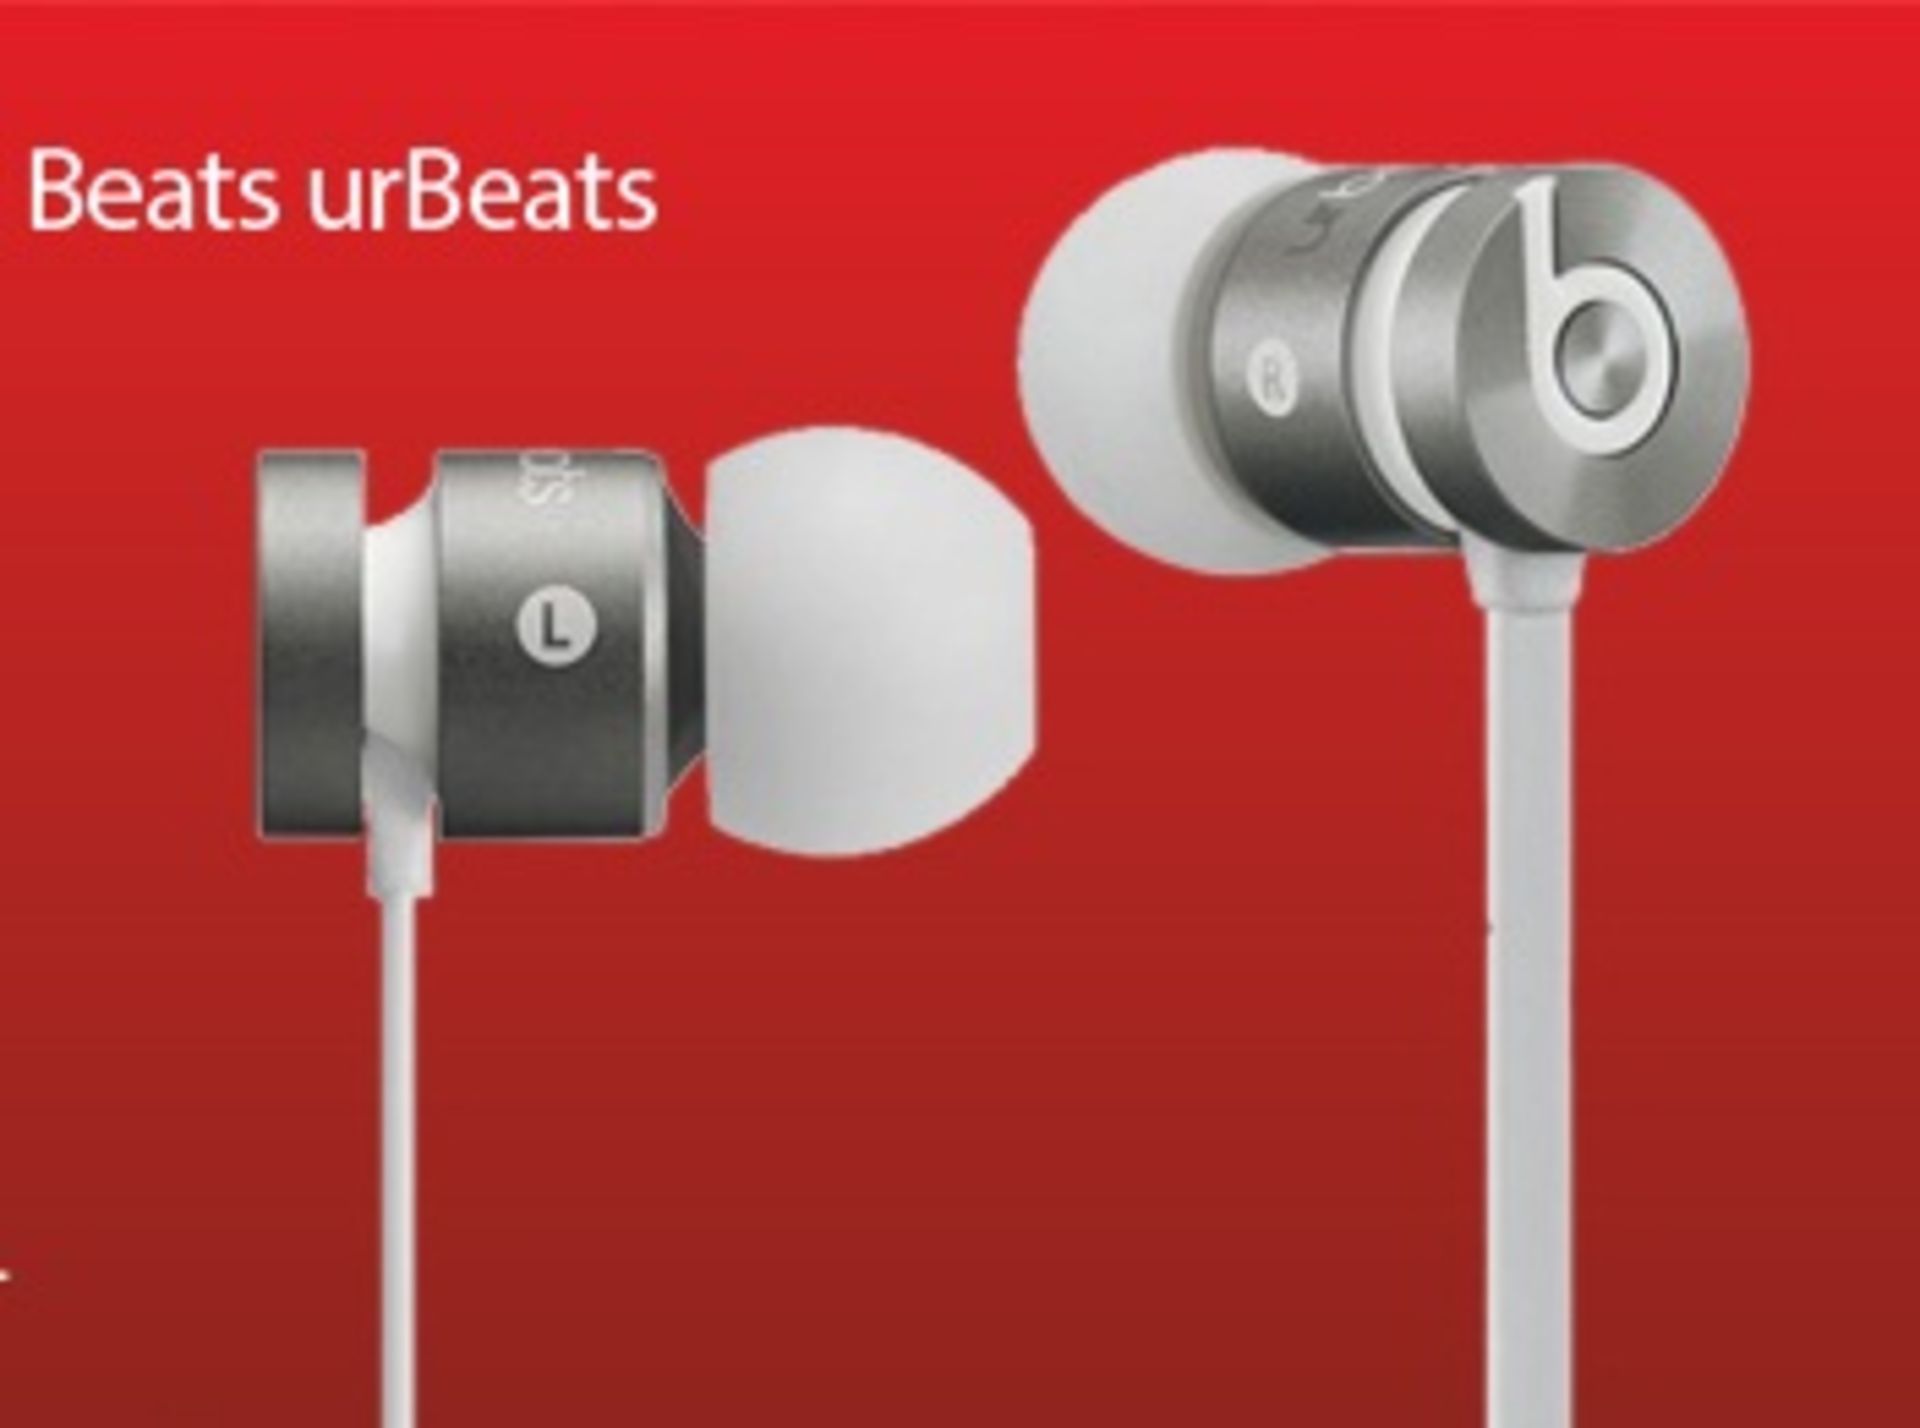 V Brand New Beats By Dr Dre urBeats Earphones - Silver - These are boxed and sealed - With Apple - Image 3 of 3